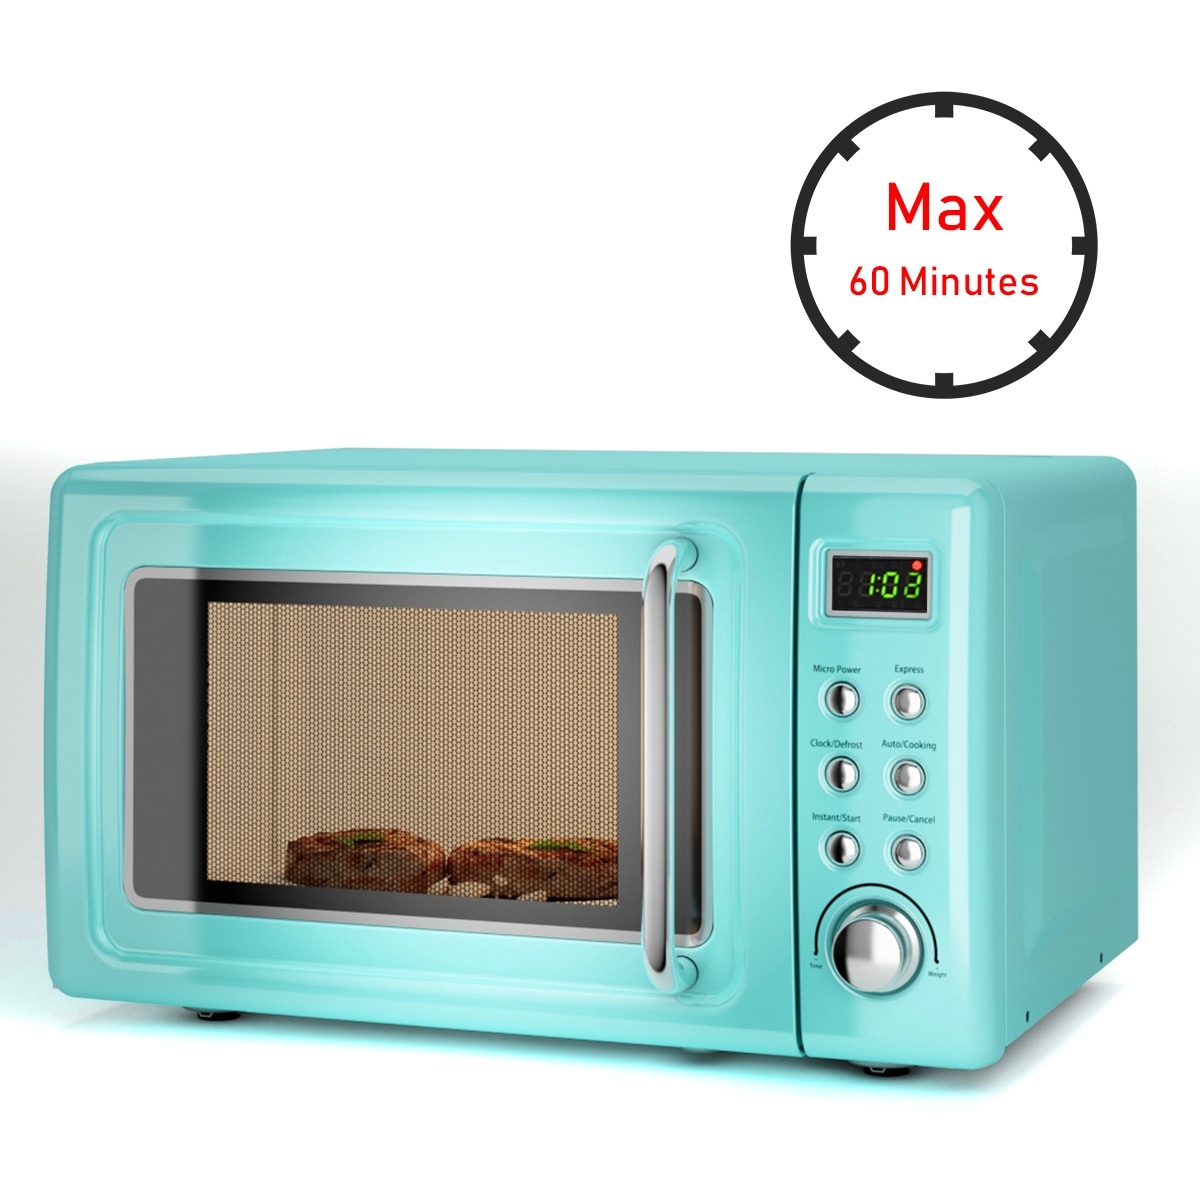 0.7 Cu. Ft Retro Microwave Oven Sale, Price & Reviews - Eletriclife